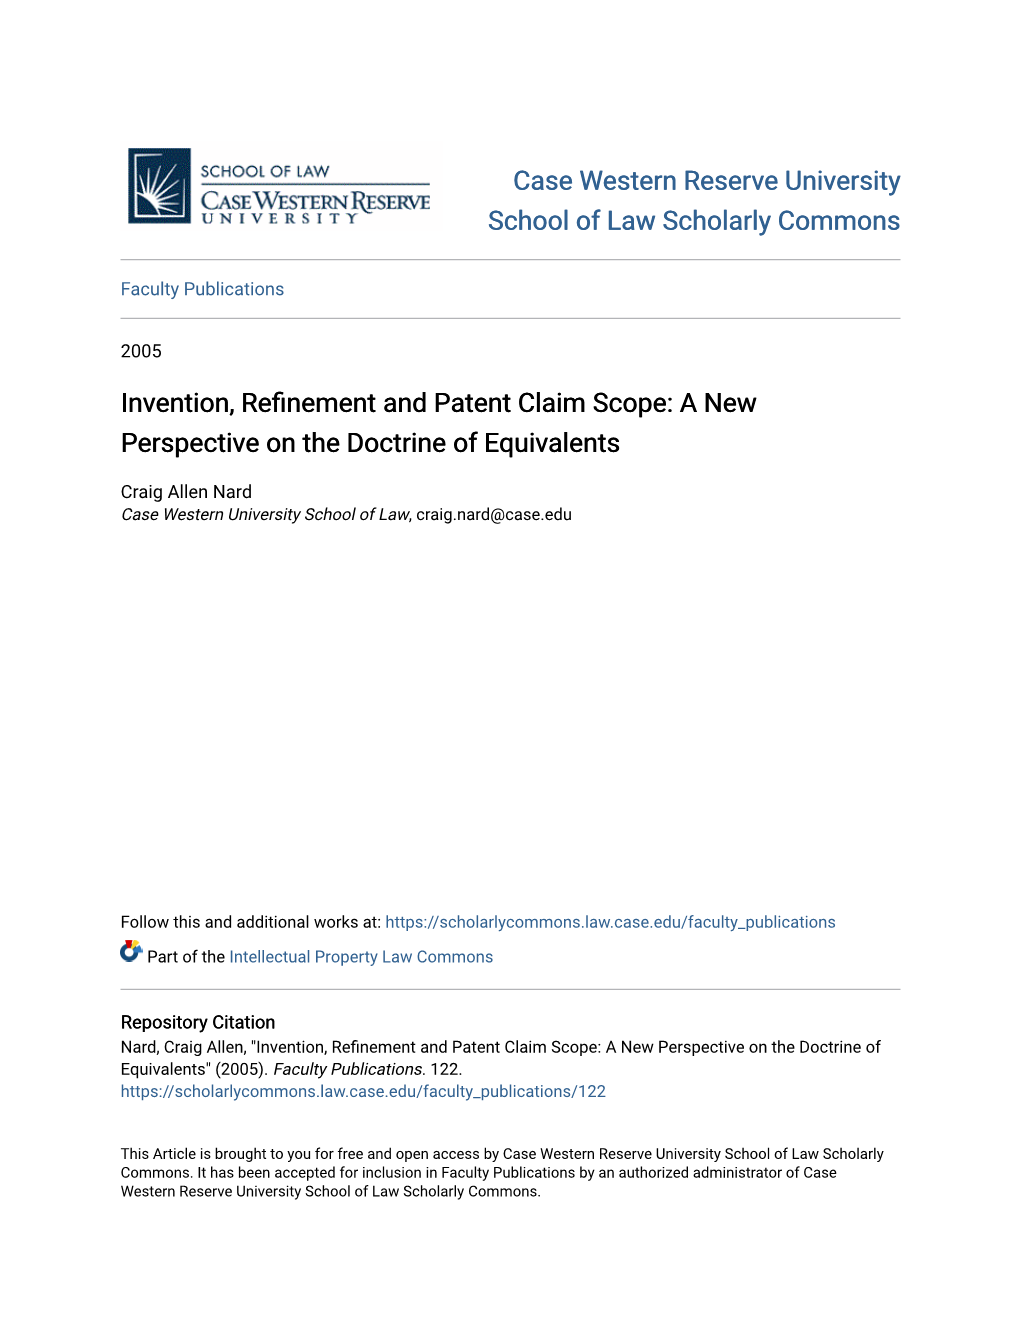 Invention, Refinement and Patent Claim Scope: a New Perspective on the Doctrine of Equivalents